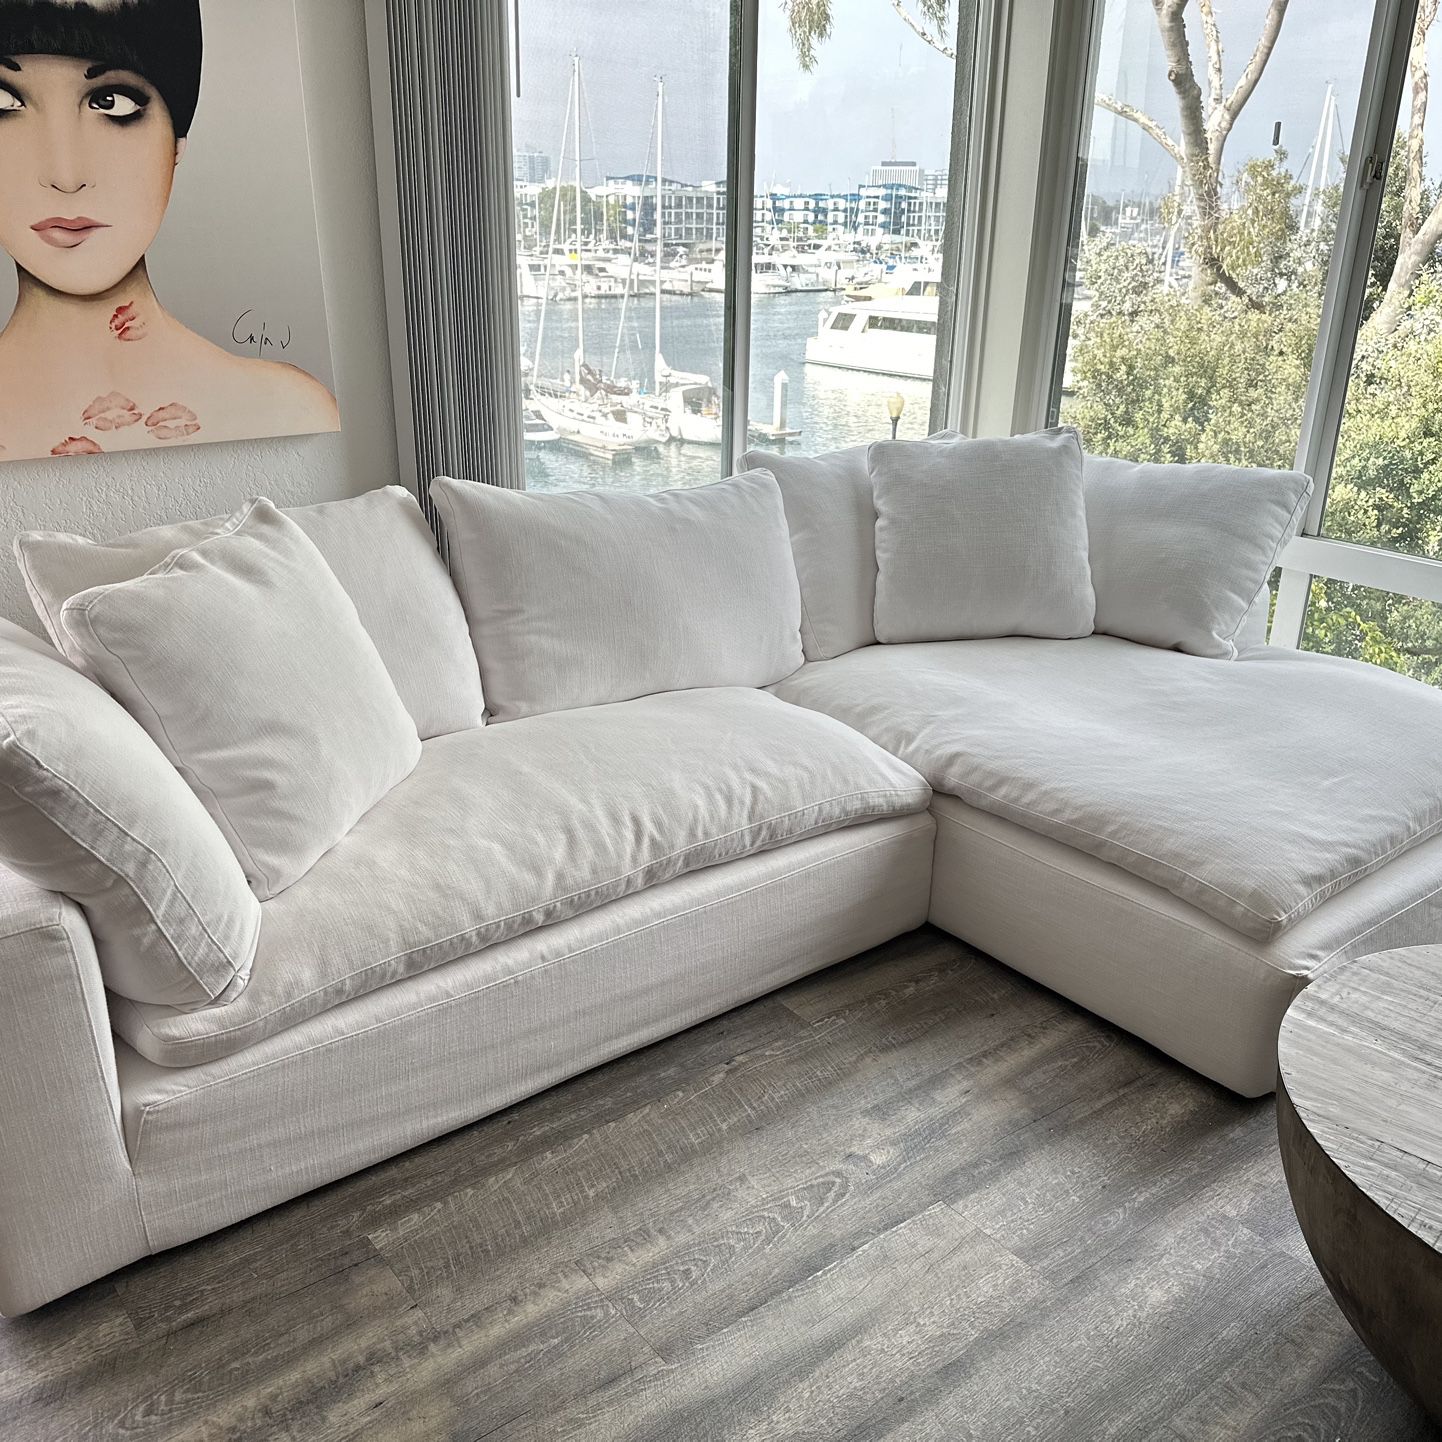 RARE FIND - Gorgeous, Well Maintained Restoration hardware Cloud Couch